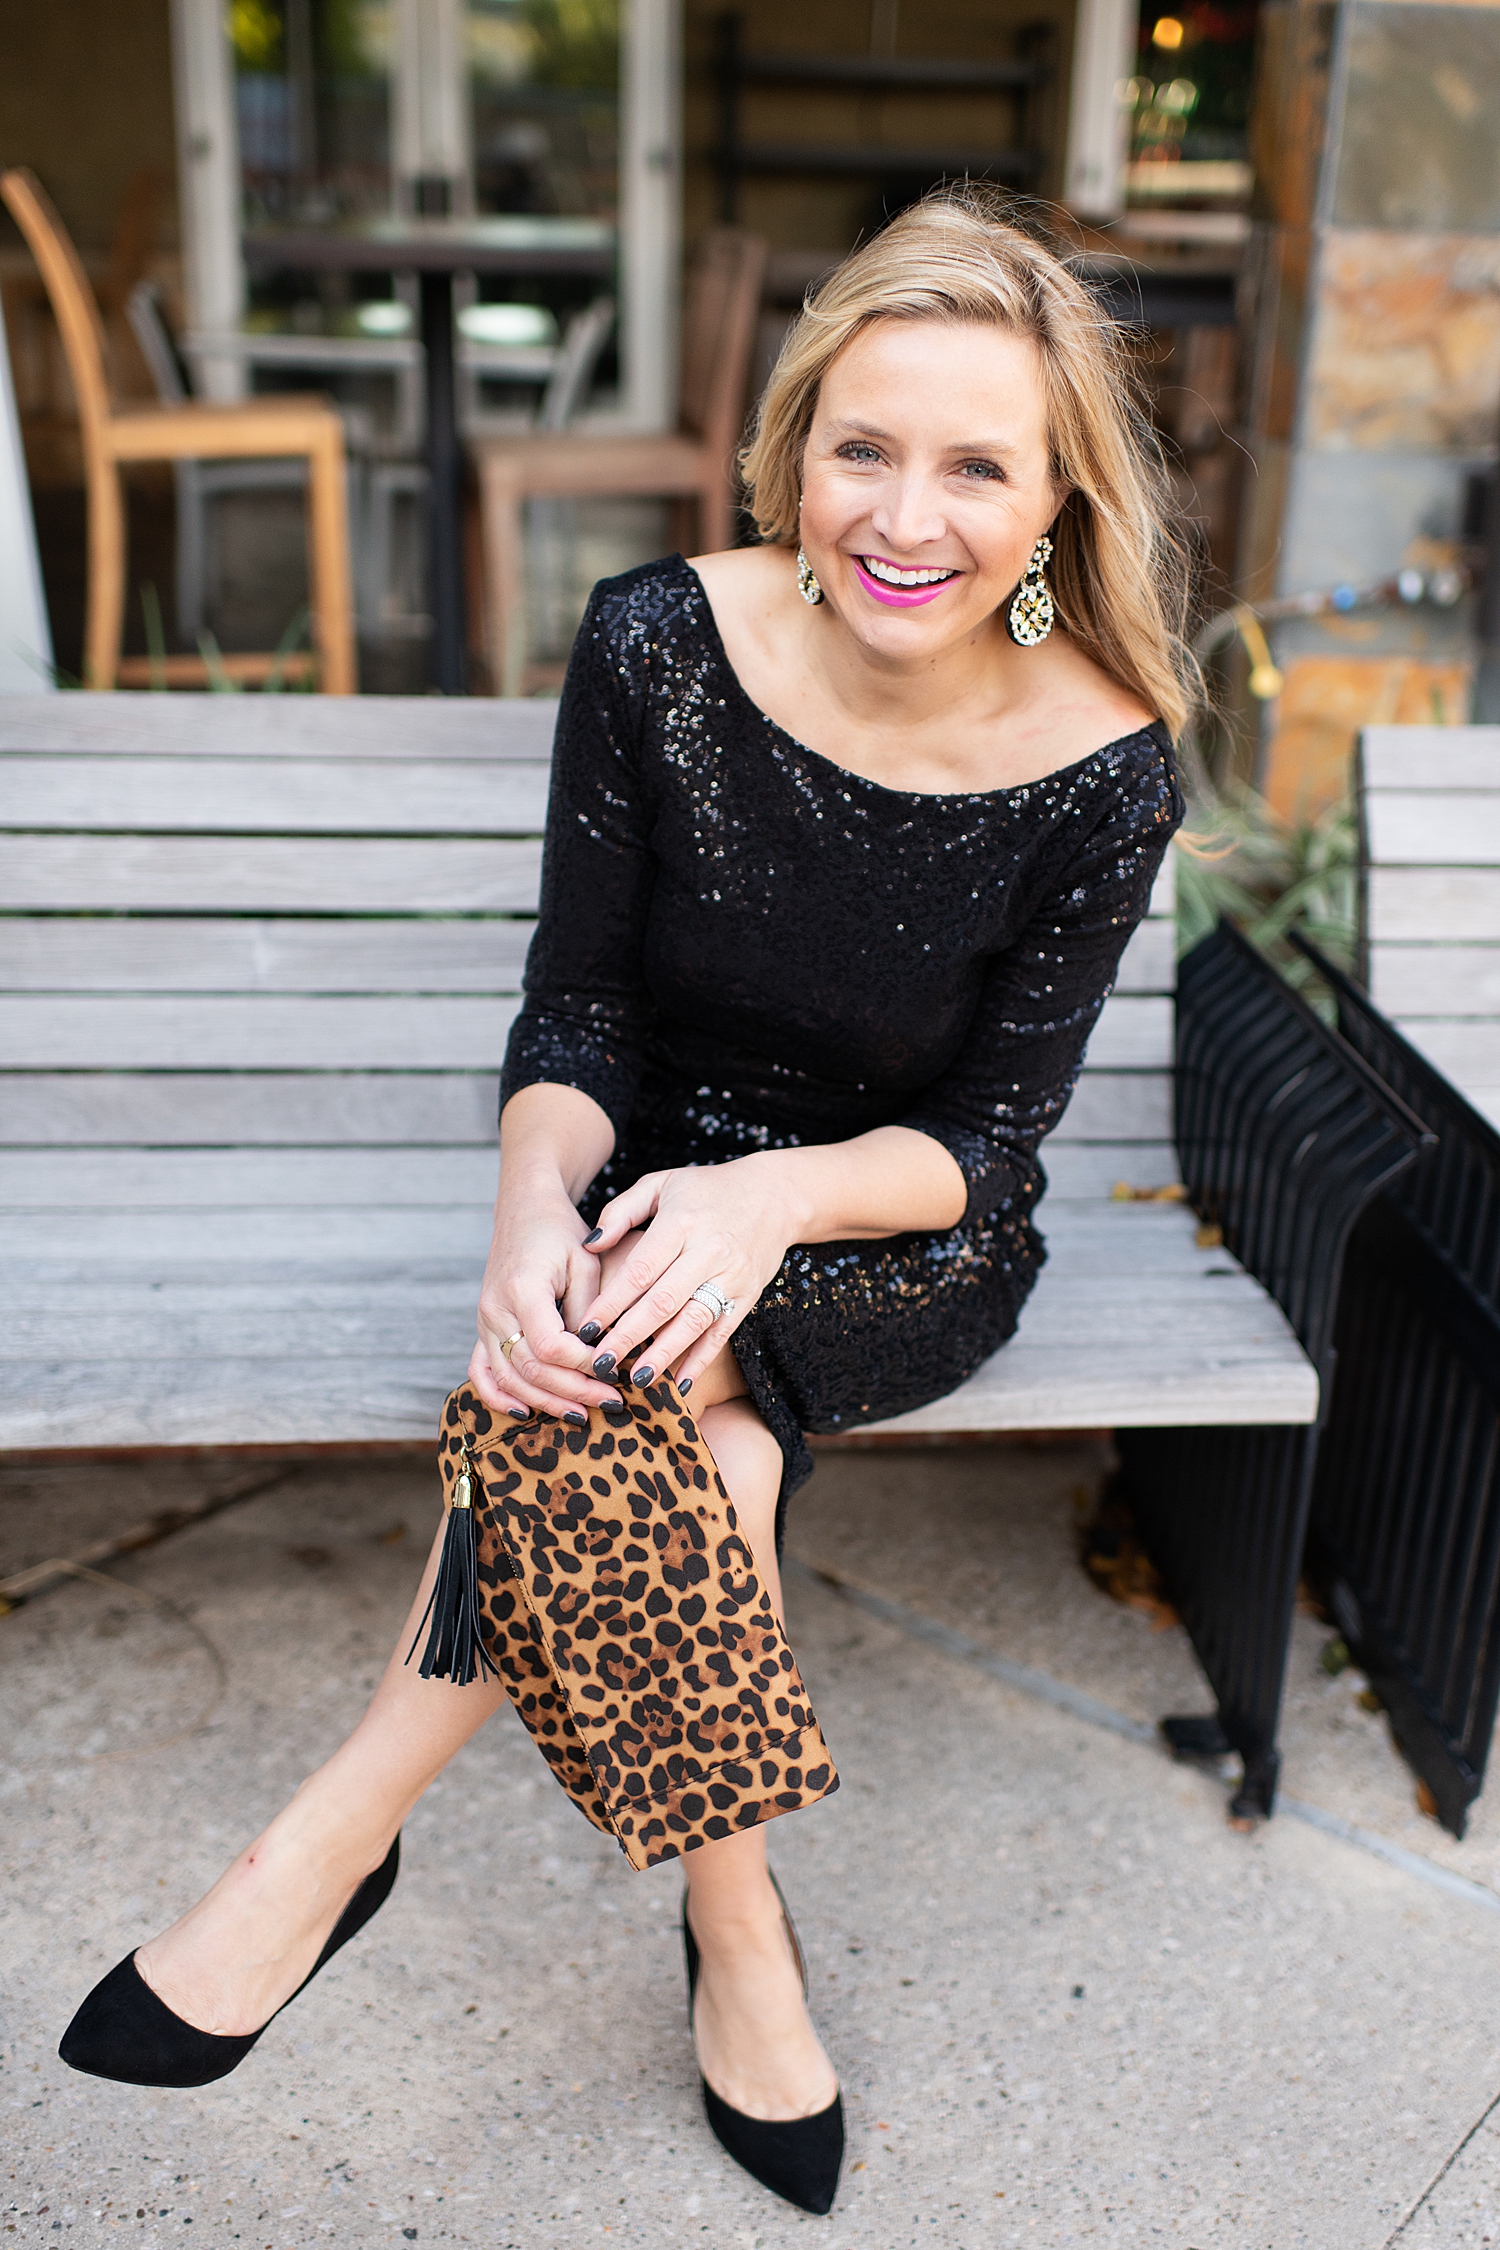 Top Houston fashion blogger, Fancy Ashley, features 7 Holiday Outfits perfect for the season: image of a woman wearing Black sequin top, sequin pencil skirt, Kate Spade earrings, leopard clutch all available at Nordstrom